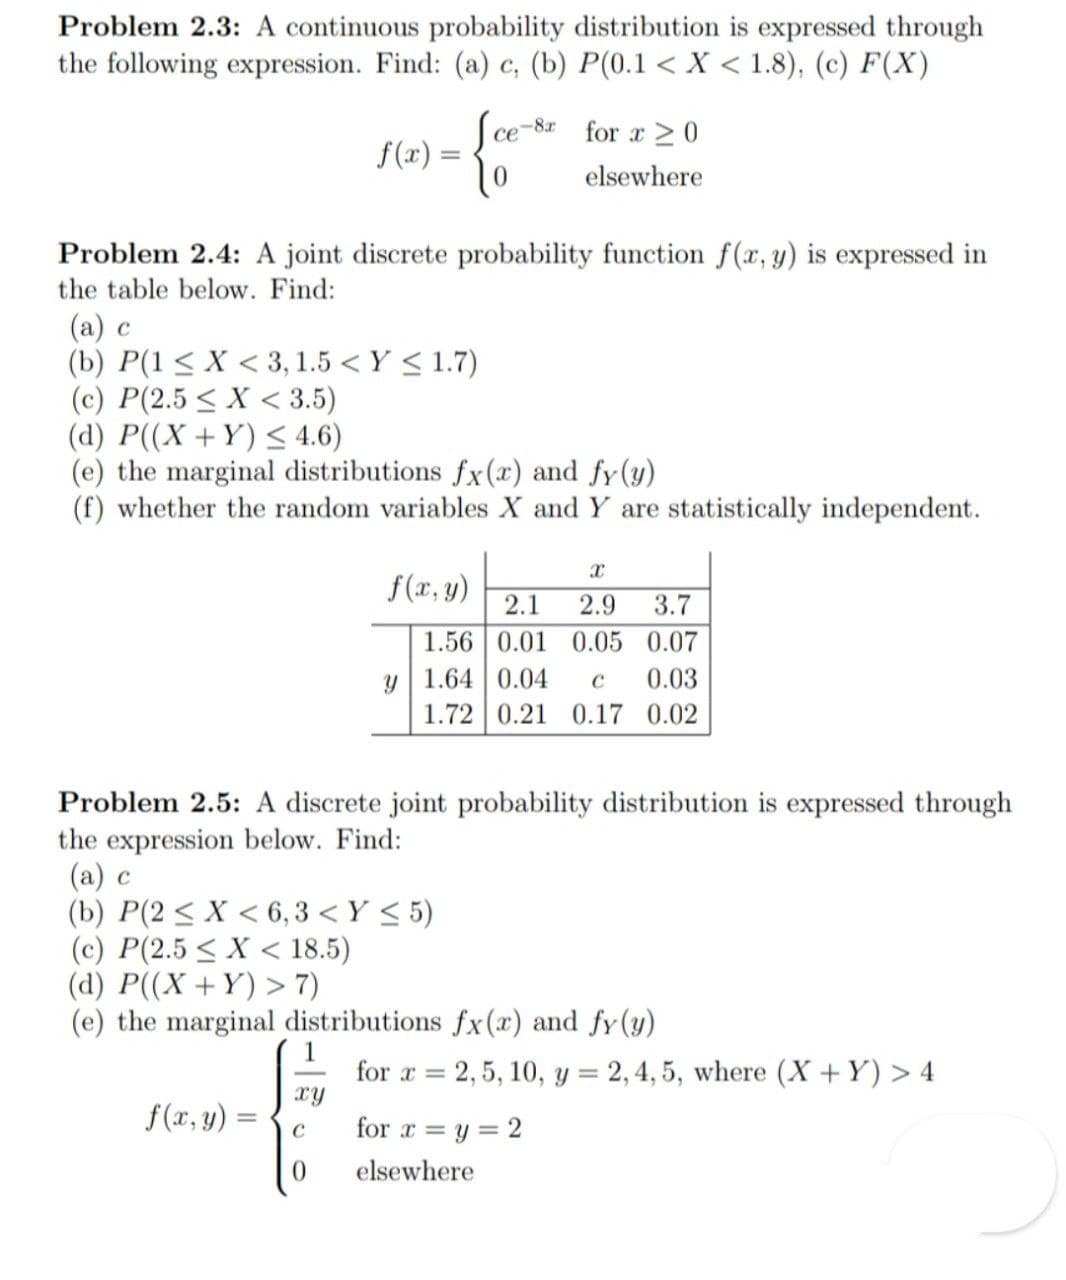 Problem 2.3: A continuous probability distribution is expressed through
the following expression. Find: (a) c, (b) P(0.1 < X < 1.8), (c) F(X)
Ce-8r
for x >0
f(x) =
elsewhere
Problem 2.4: A joint discrete probability function f(x, y) is expressed in
the table below. Find:
(а) с
(b) P(1 < X < 3, 1.5 < Y < 1.7)
(c) P(2.5 < X < 3.5)
(d) P((X +Y) < 4.6)
(e) the marginal distributions fx(x) and fy(y)
(f) whether the random variables X and Y are statistically independent.
f(x, y)
2.1
3.7
2.9
1.56 0.01 0.05 0.07
y| 1.64 0.04
1.72 0.21
C
0.03
0.17 0.02
Problem 2.5: A discrete joint probability distribution is expressed through
the expression below. Find:
(a) c
(b) P(2 < X < 6,3 < Y < 5)
(c) P(2.5 < X < 18.5)
(d) P((X +Y) > 7)
(e) the marginal distributions fx(x) and fy (y)
1
for x = 2,5, 10, y = 2,4, 5, where (X +Y) > 4
xy
f(x, y) =
for r = y = 2
%3D
elsewhere
